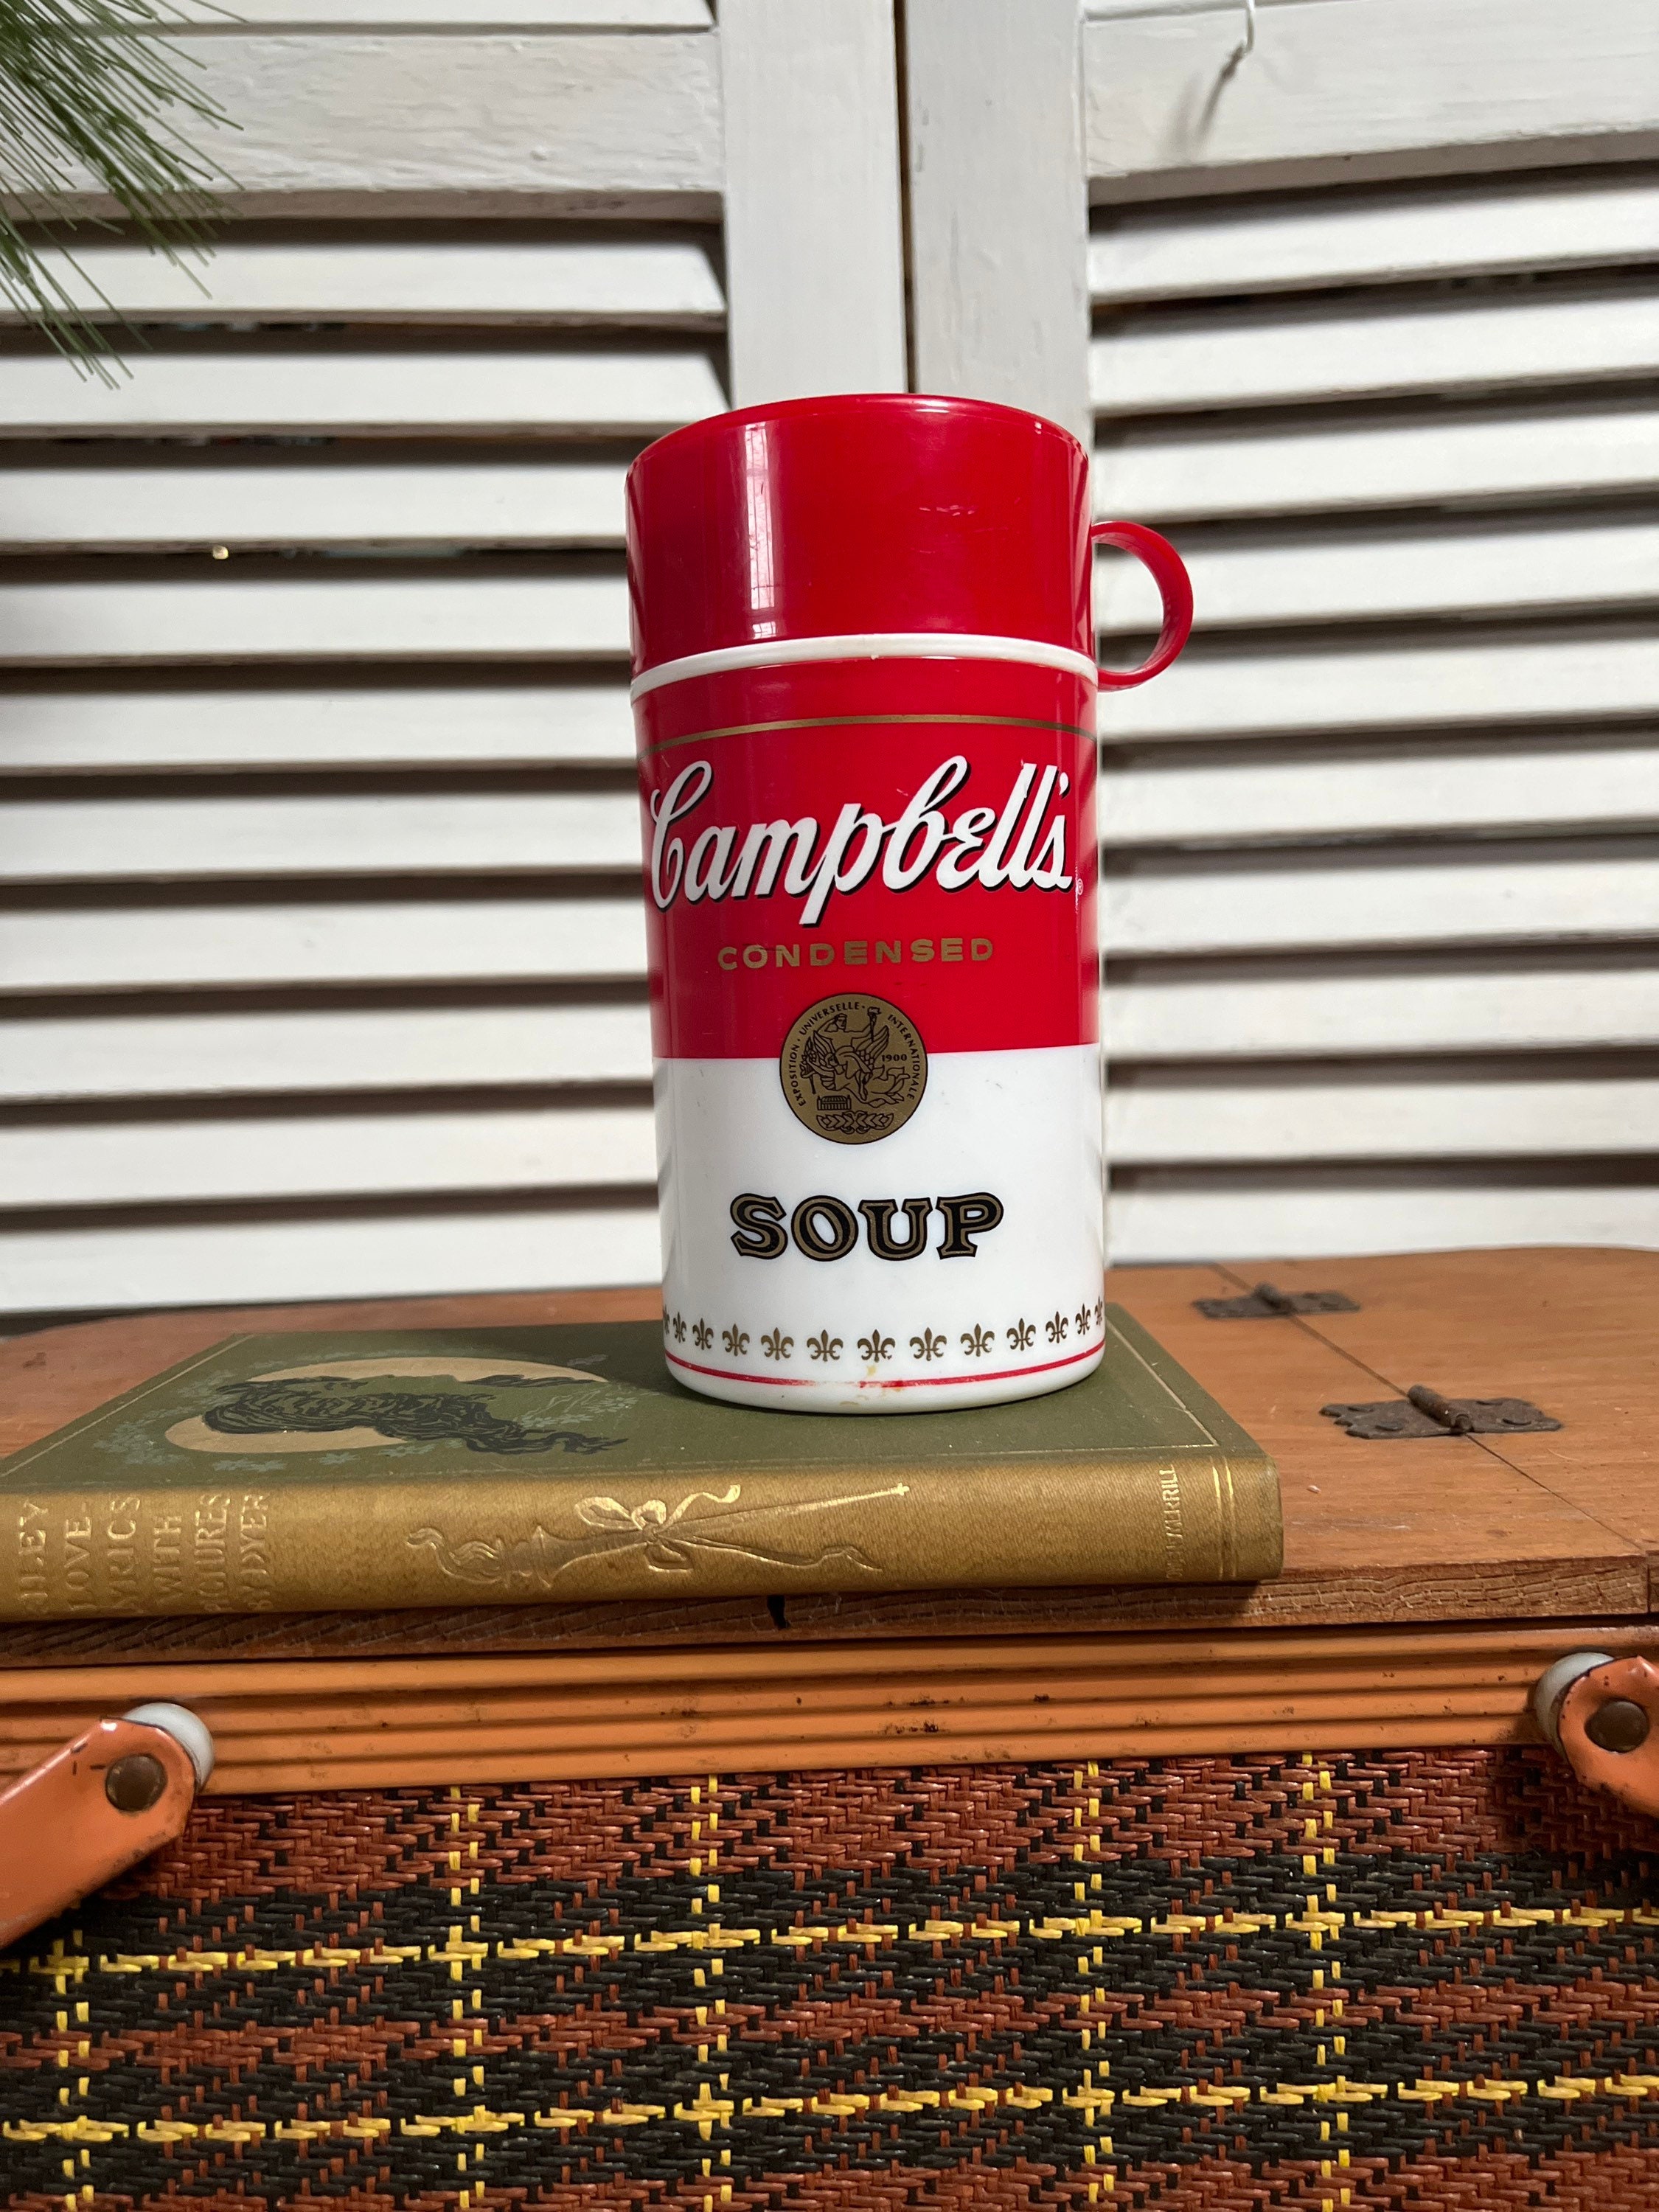 Campbell's Soup Thermos, Thermos Set, Red and White, Food Carrier